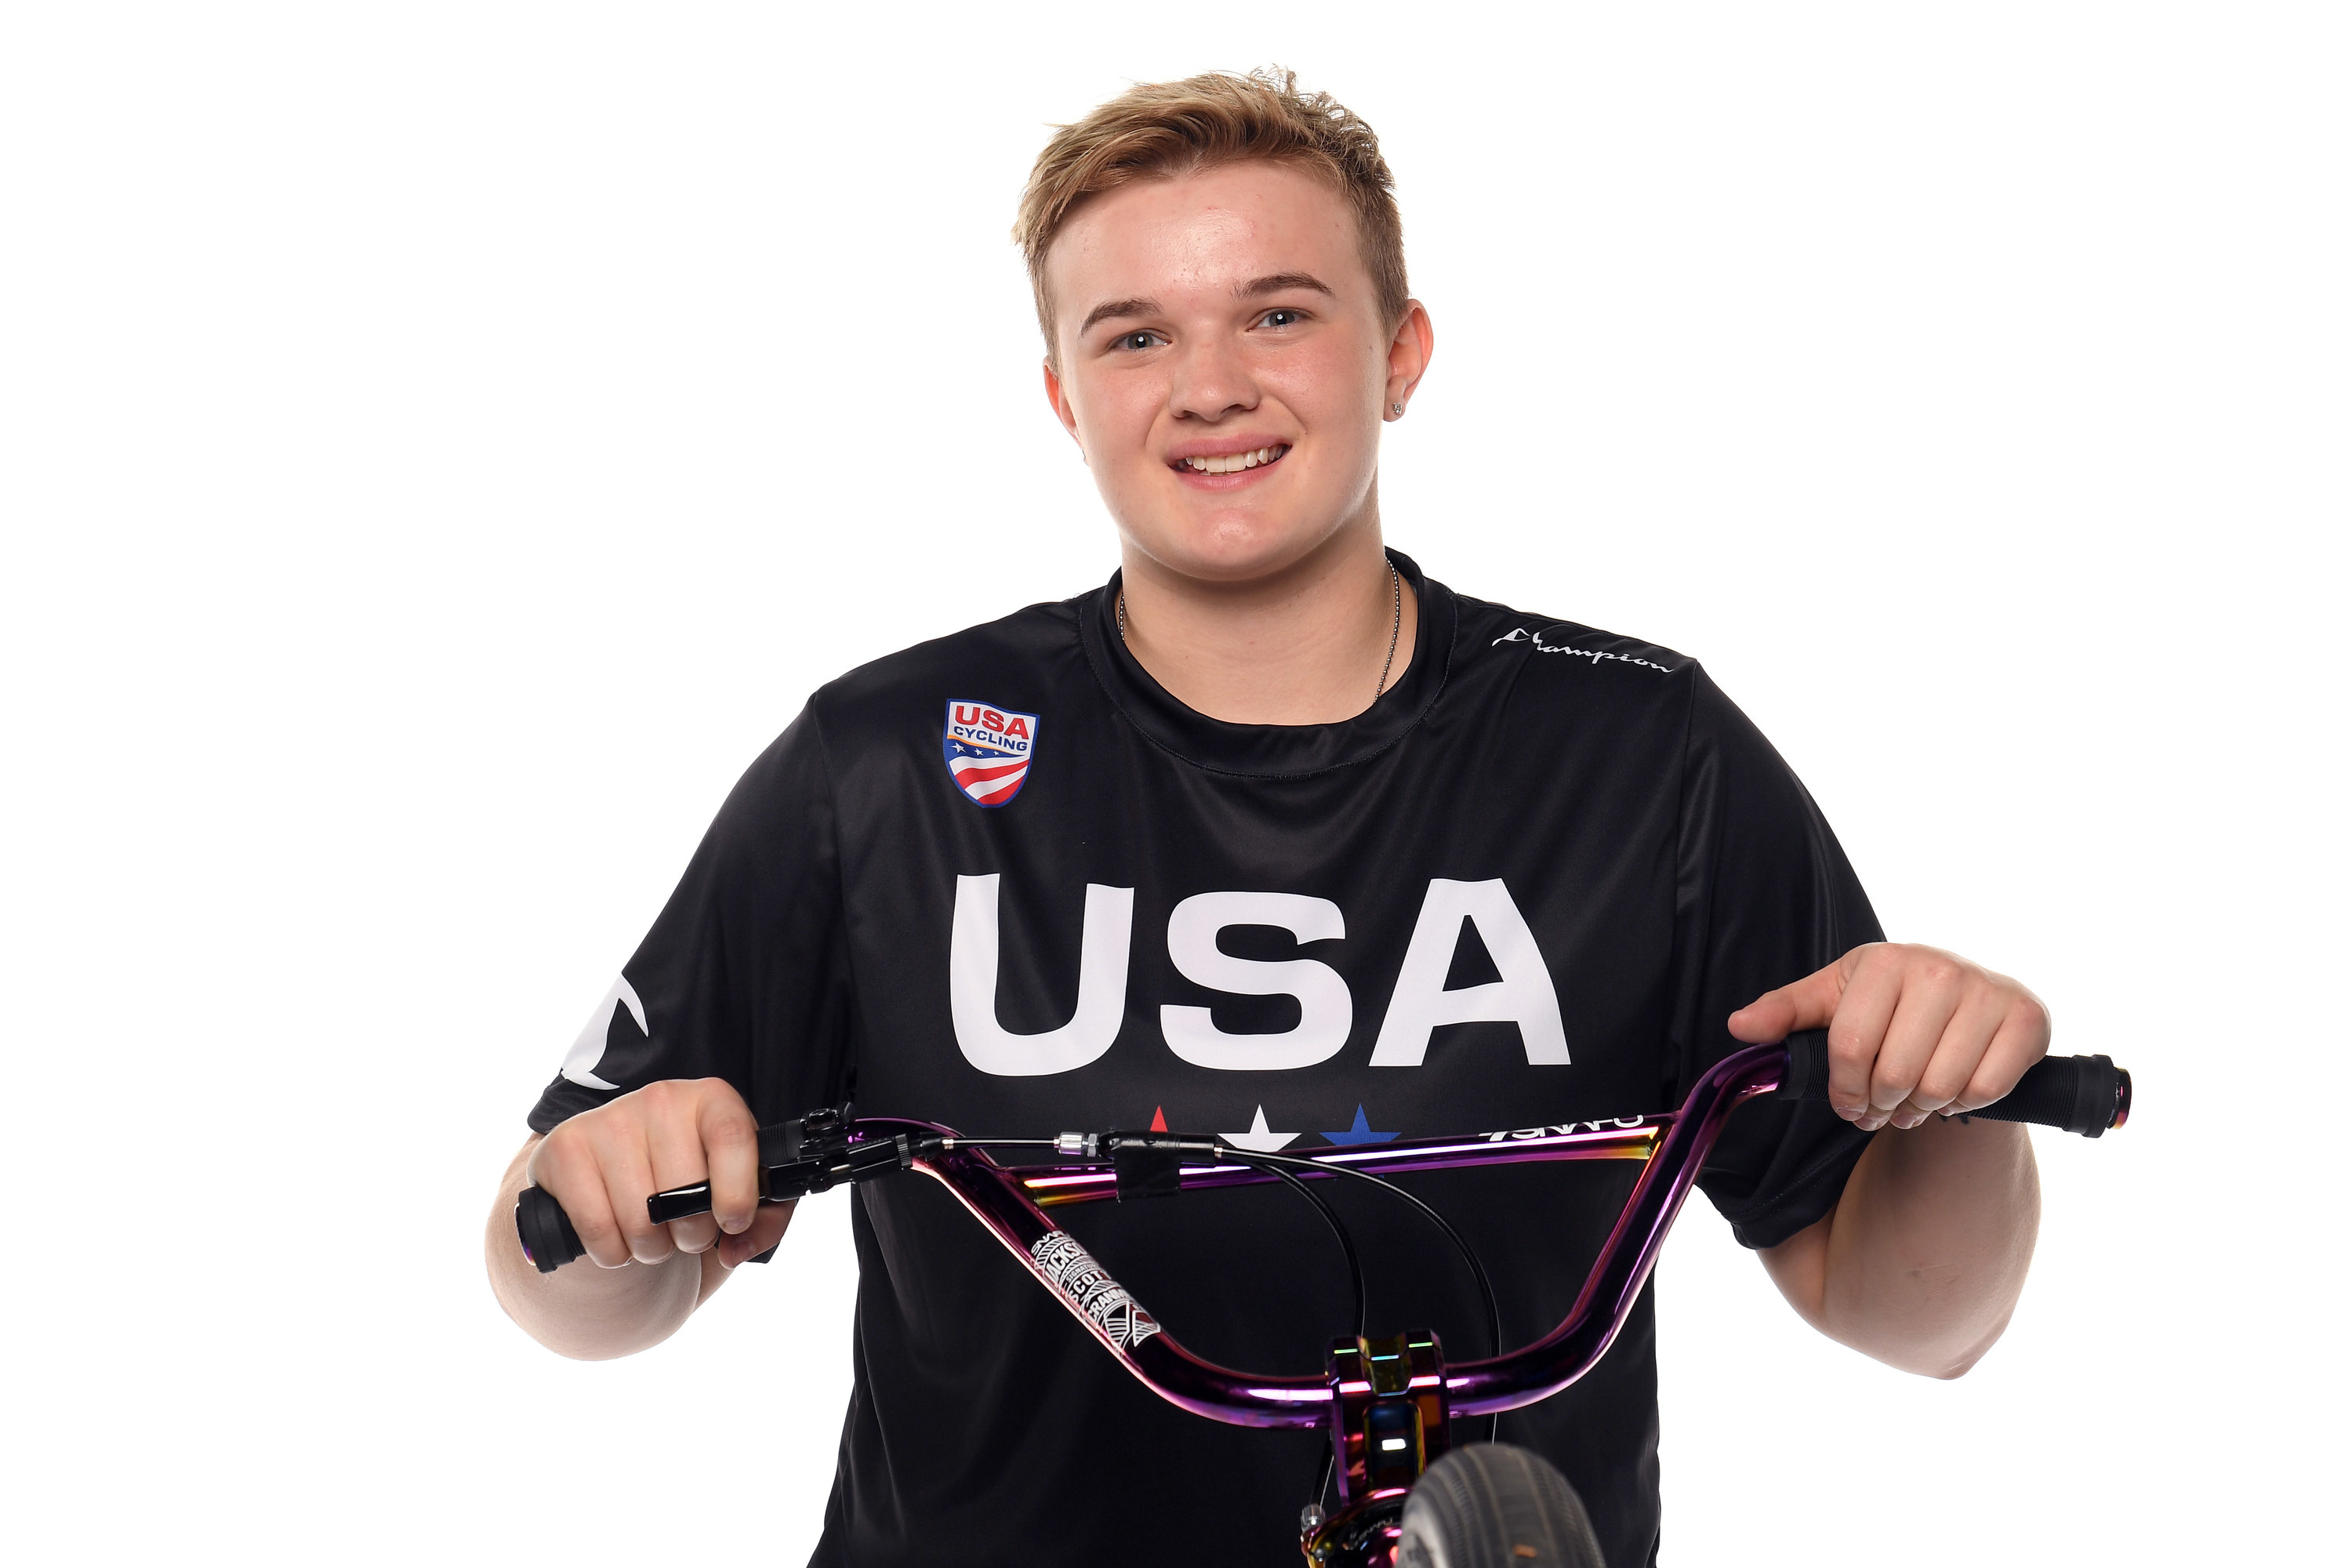 Hannah wearing a team usa shirt and posing with her bike